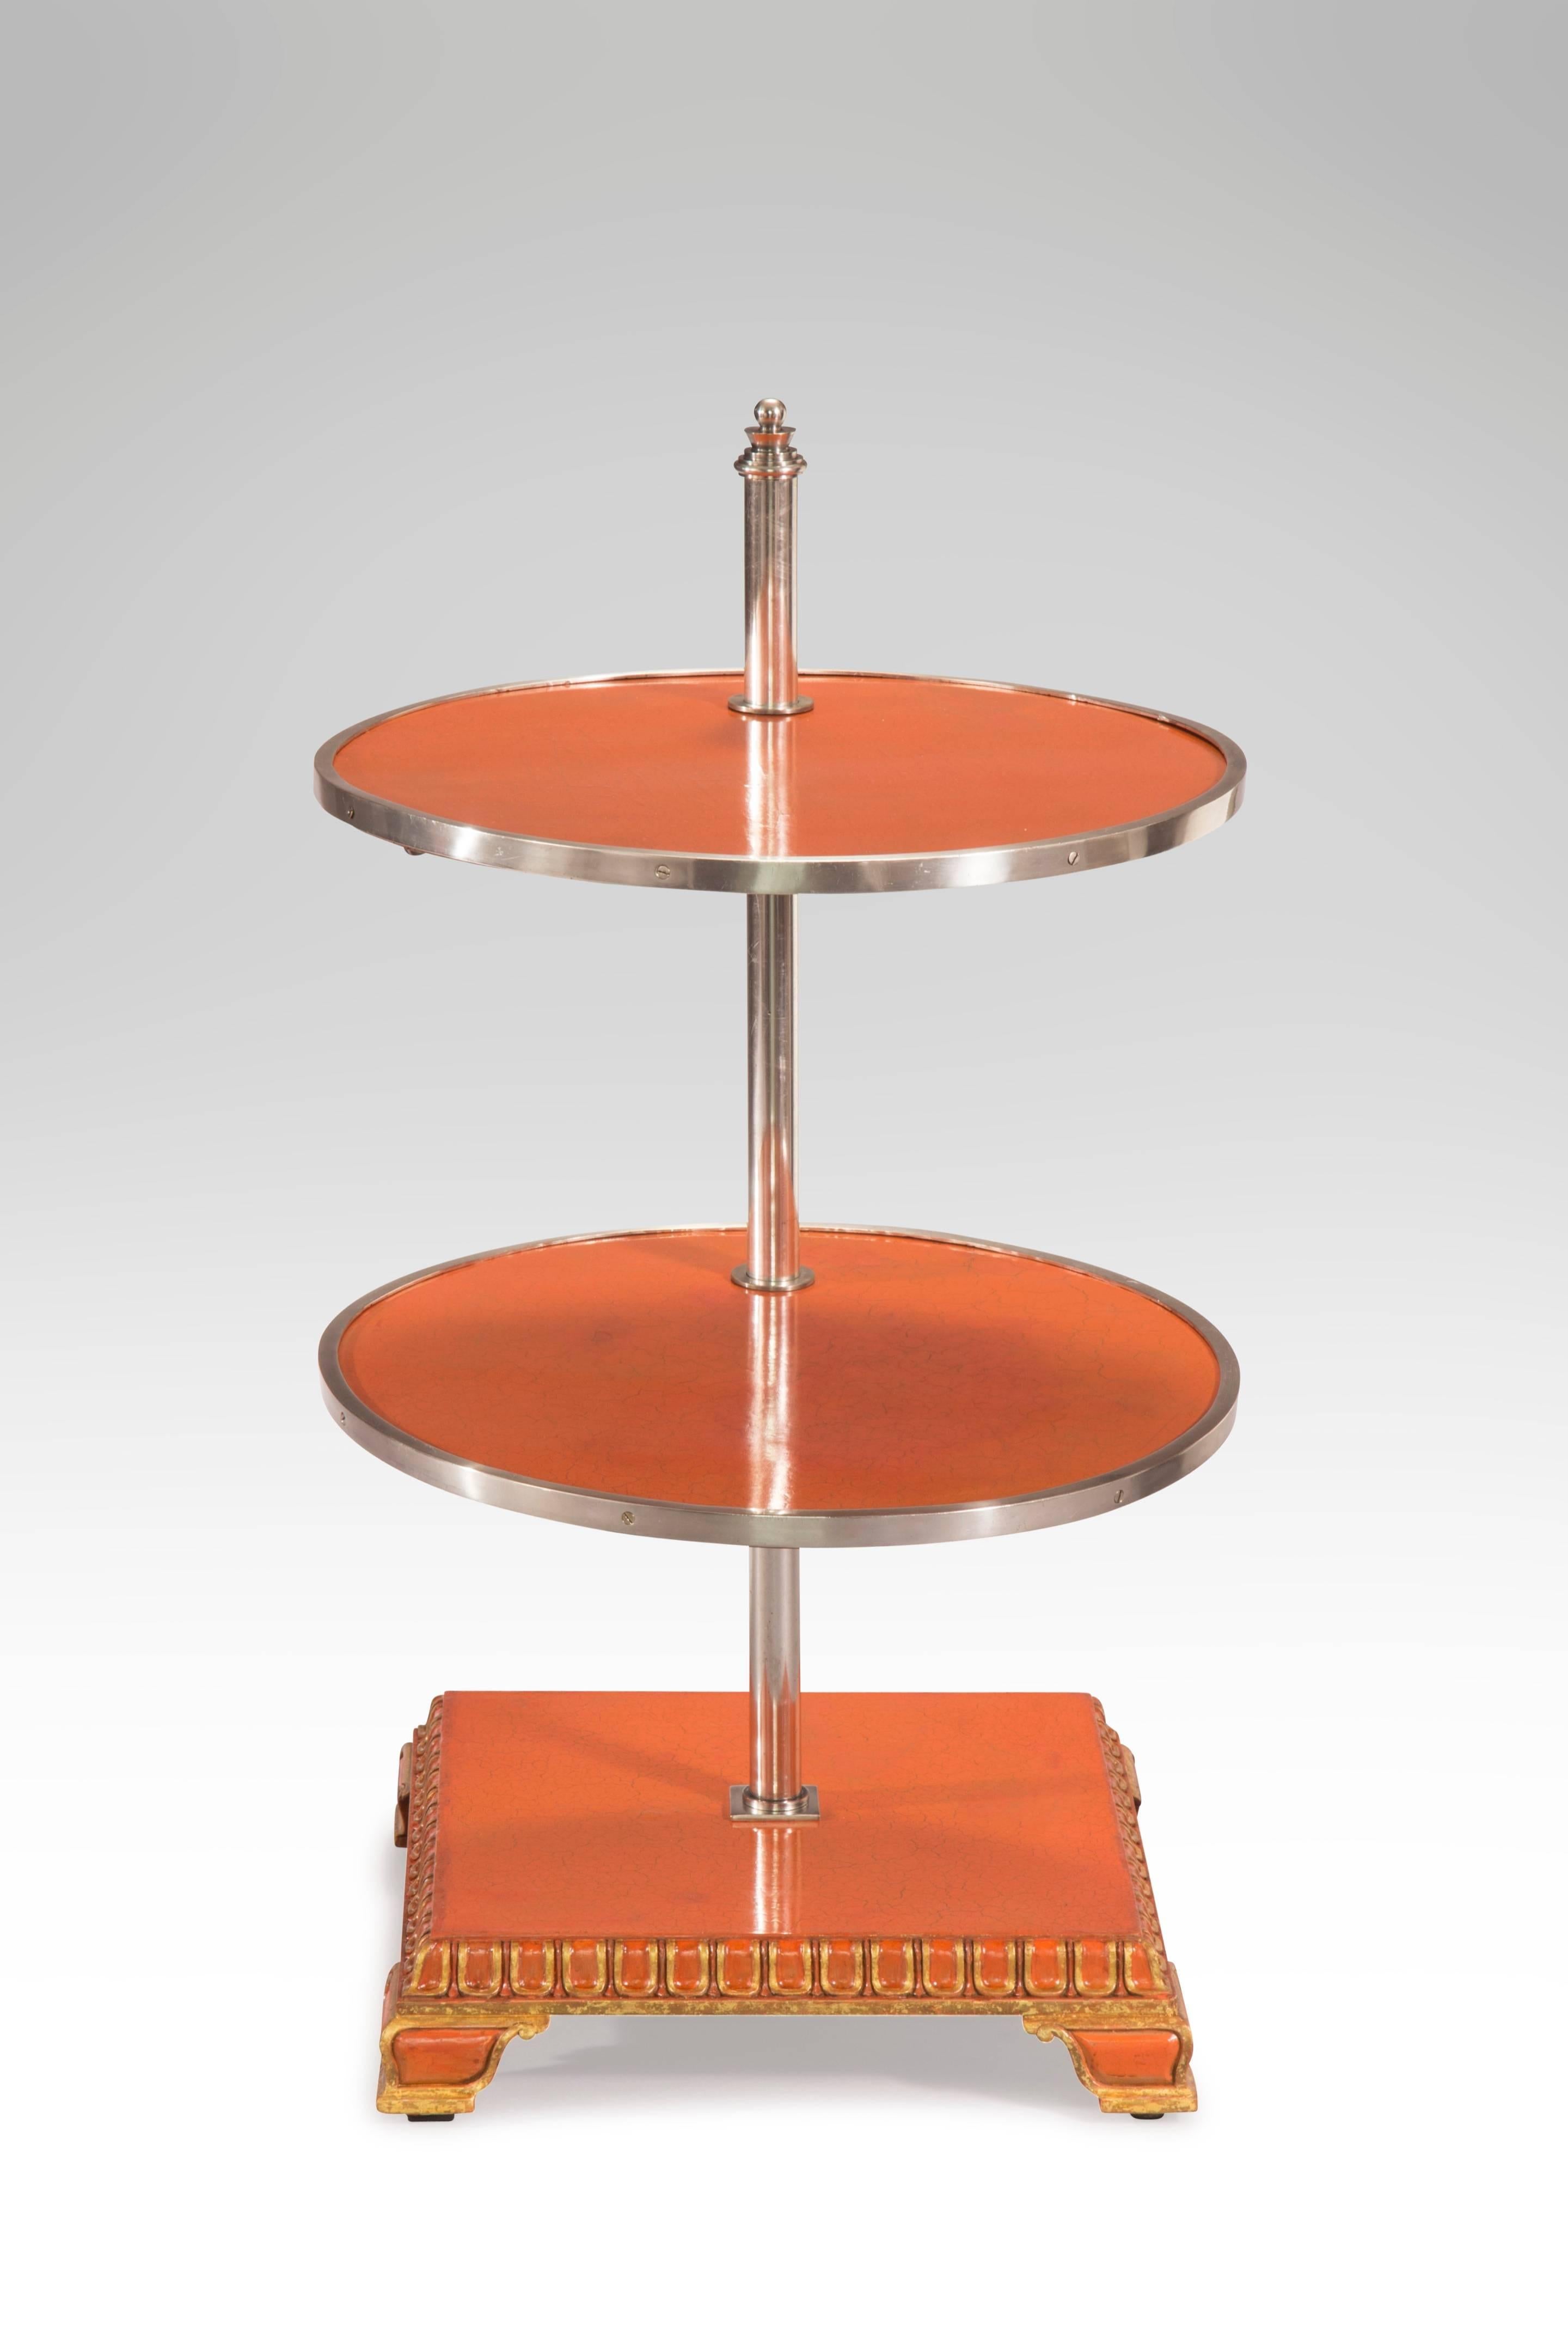 A hard to find table in very good condition with an alluring color. The metal banded adjustable round shelves, supported by a central nickel cylinder surmounted by a stylized finial, above a square pedestal base with tongue and dart molding, on